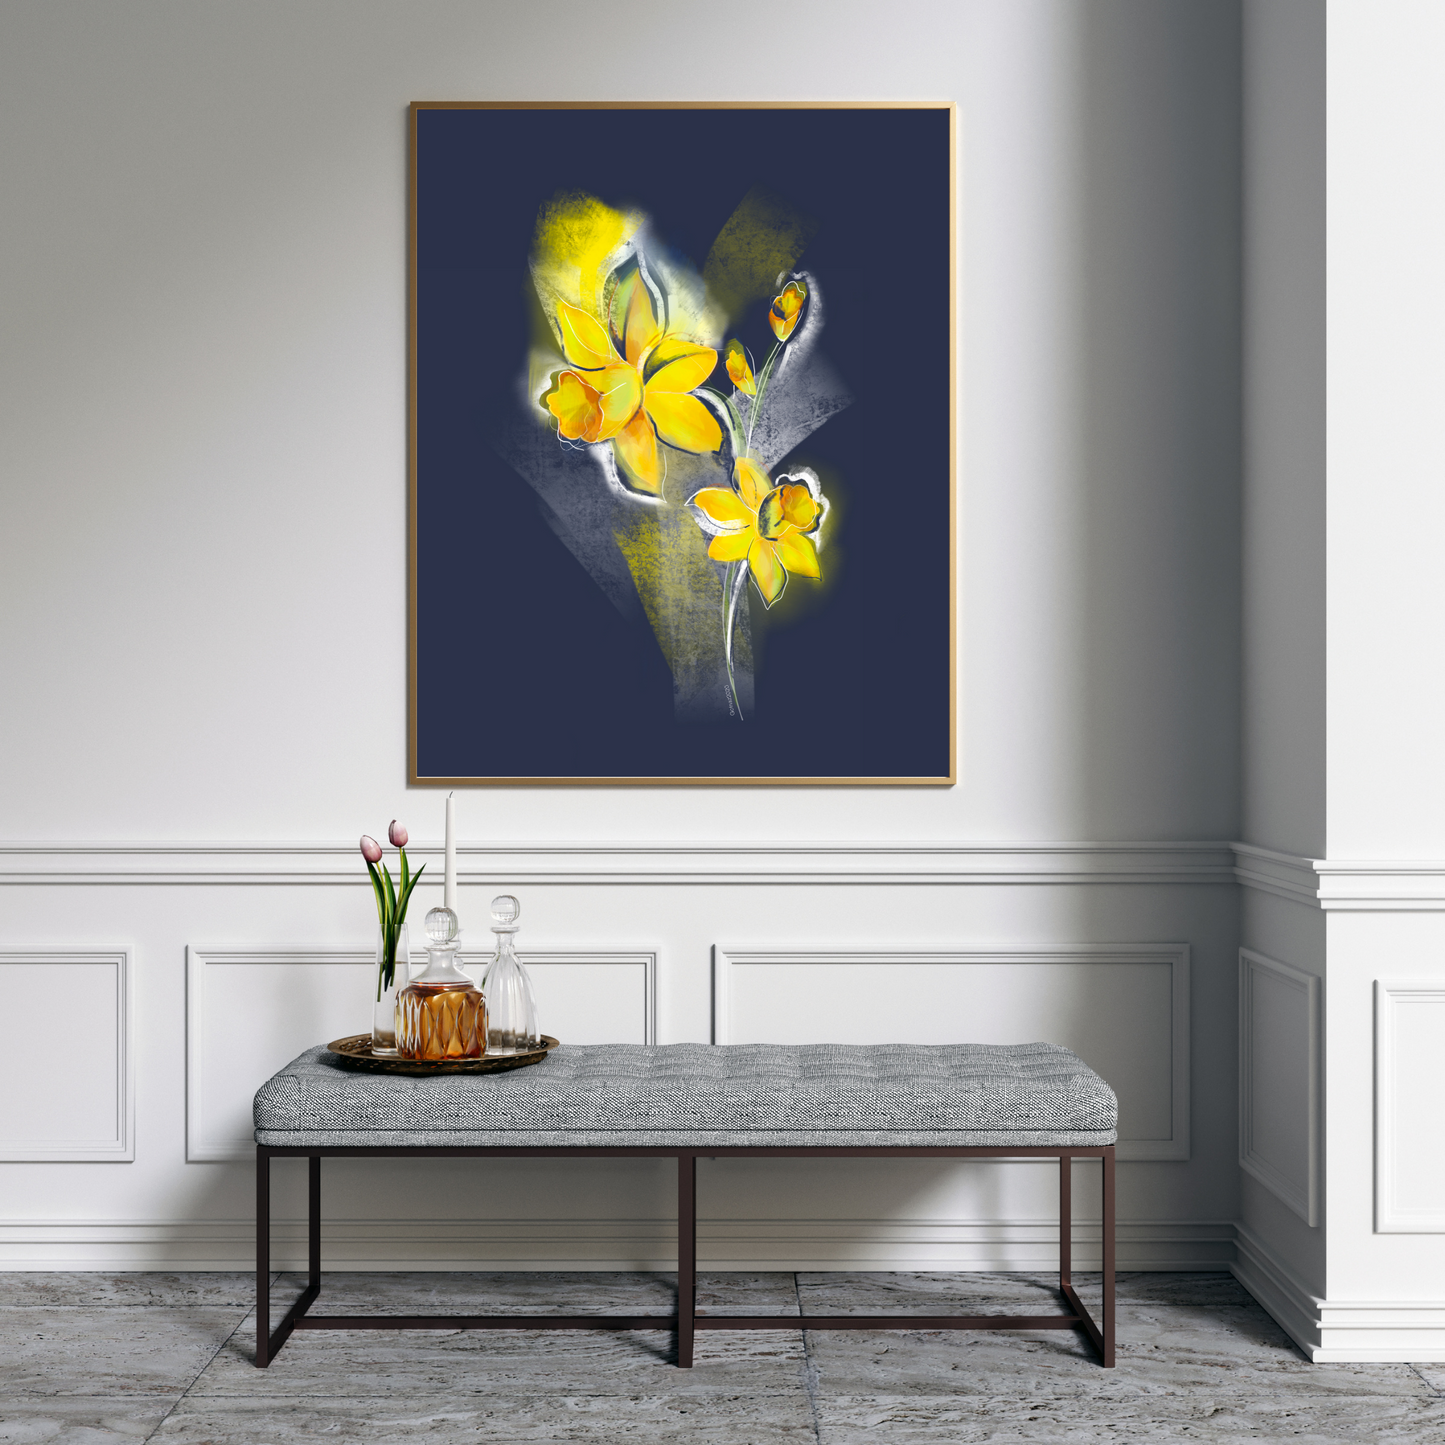 An example of the Daffodil painting by ArisaTeam over a bench with a tray of drinks and flowers